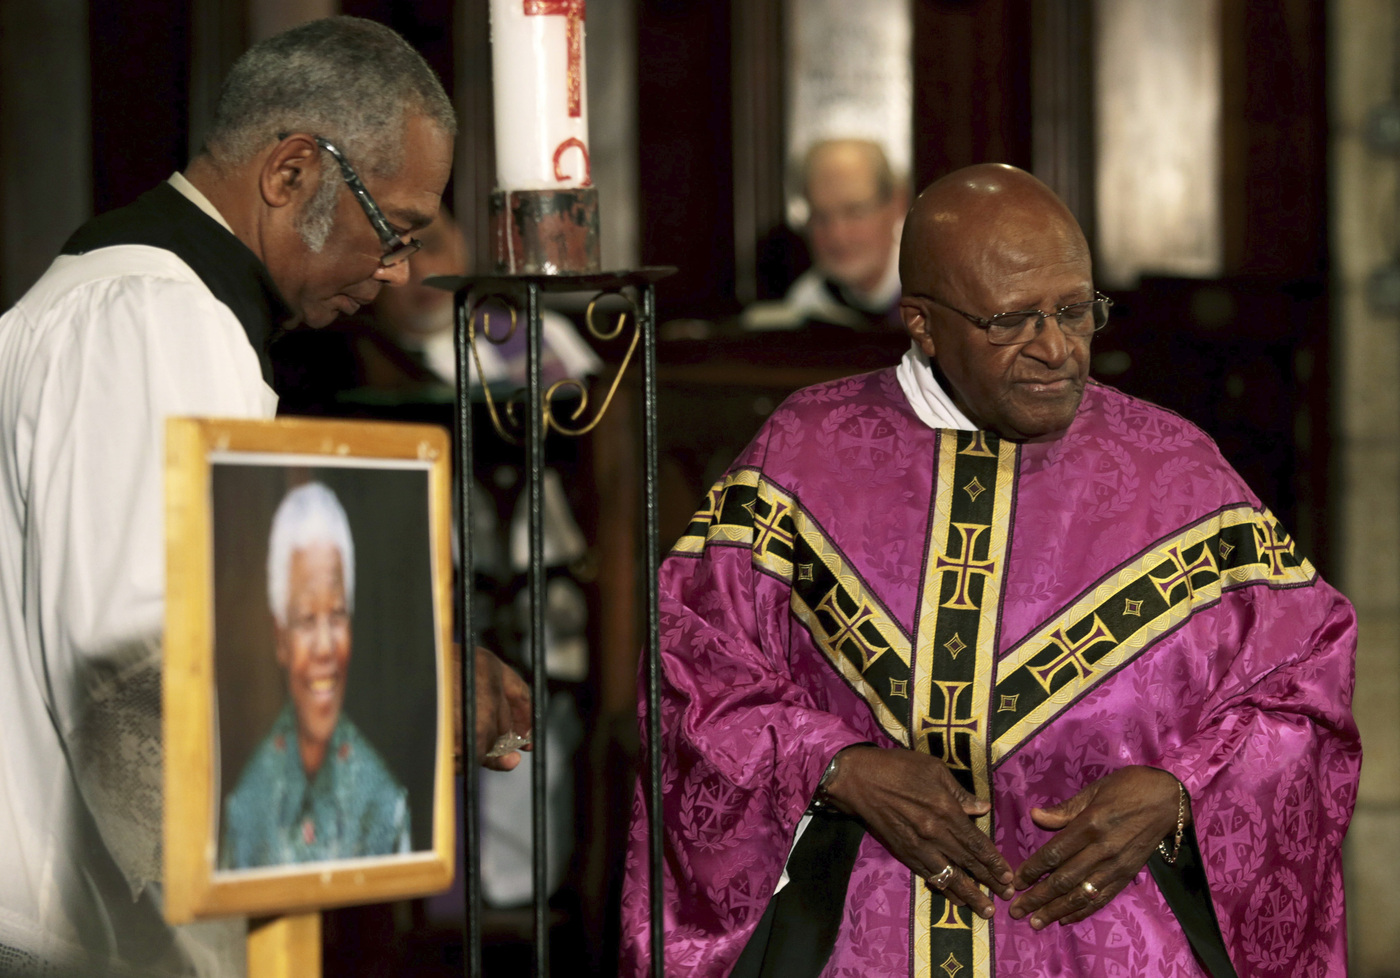 FILE - Anglican Archbishop Emeritus Desmond Tutu, right, leads a prayer service in memory of former South African president Nelson Mandela, at St George's Cathedral in Cape Town, South Africa, Friday, Dec. 6, 2013. Tutu, South Africa’s Nobel Peace Prize-winning activist for racial justice and LGBT rights and retired Anglican Archbishop of Cape Town, has died, South African President Cyril Ramaphosa announced Sunday Dec. 26, 2021. He was 90. (AP Photo, File)